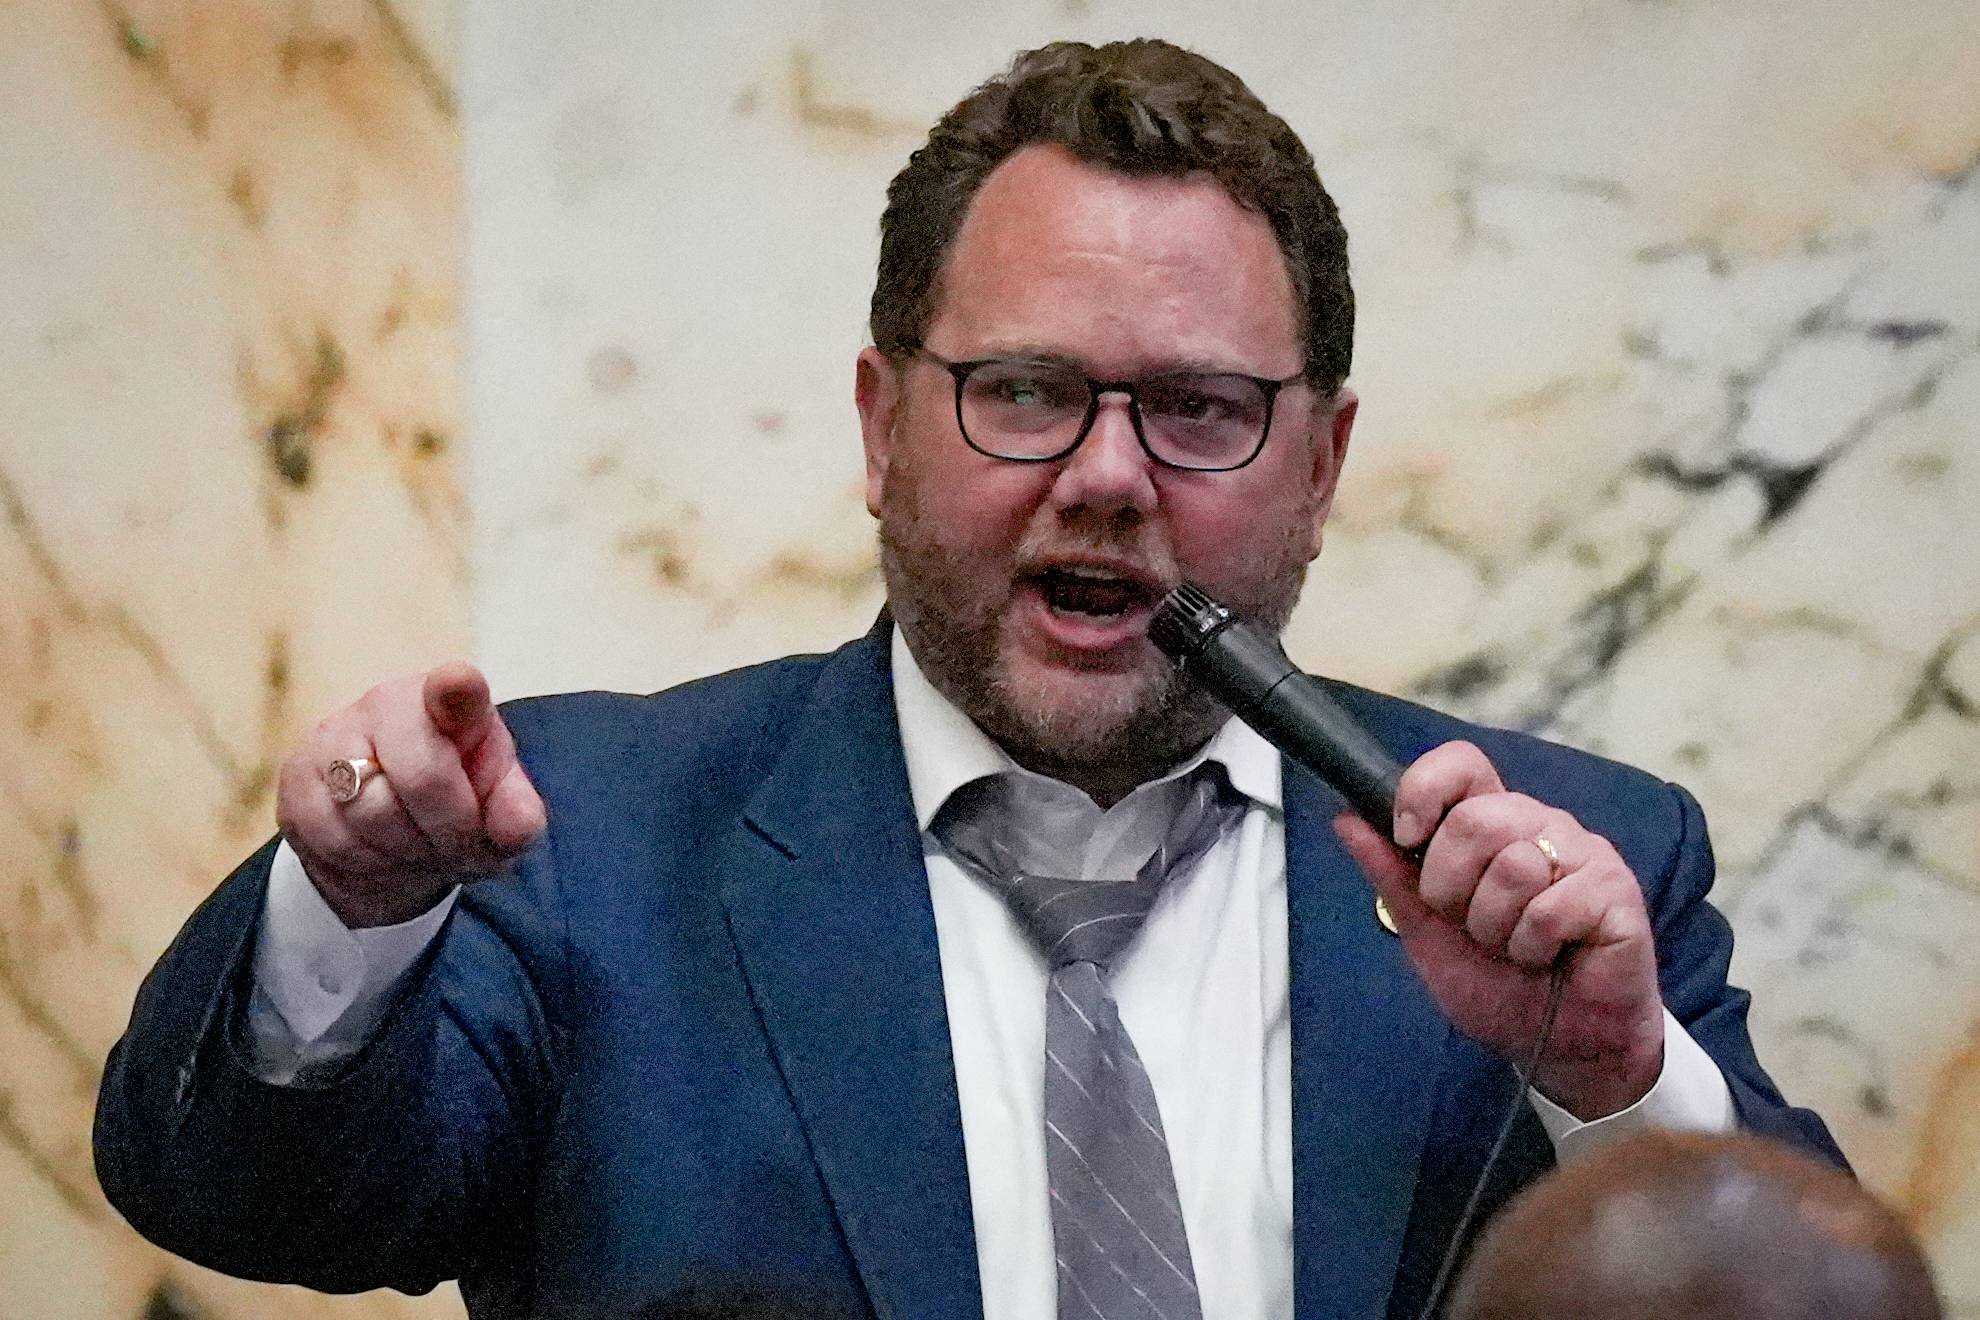 Del. Nic Kipke holds up proceedings during the final minutes of the 2023 General Assembly during Sine Die on Monday, April 10. The Anne Arundel County Republican claimed that Speaker Jones wouldn’t recognize him or members of the Republican Party, shouting “Madame Speaker, you need to take a seat!” Any bill that doesn’t get passed by midnight on Sine Die is effectively dead, and lawmakers will need to try again next year.